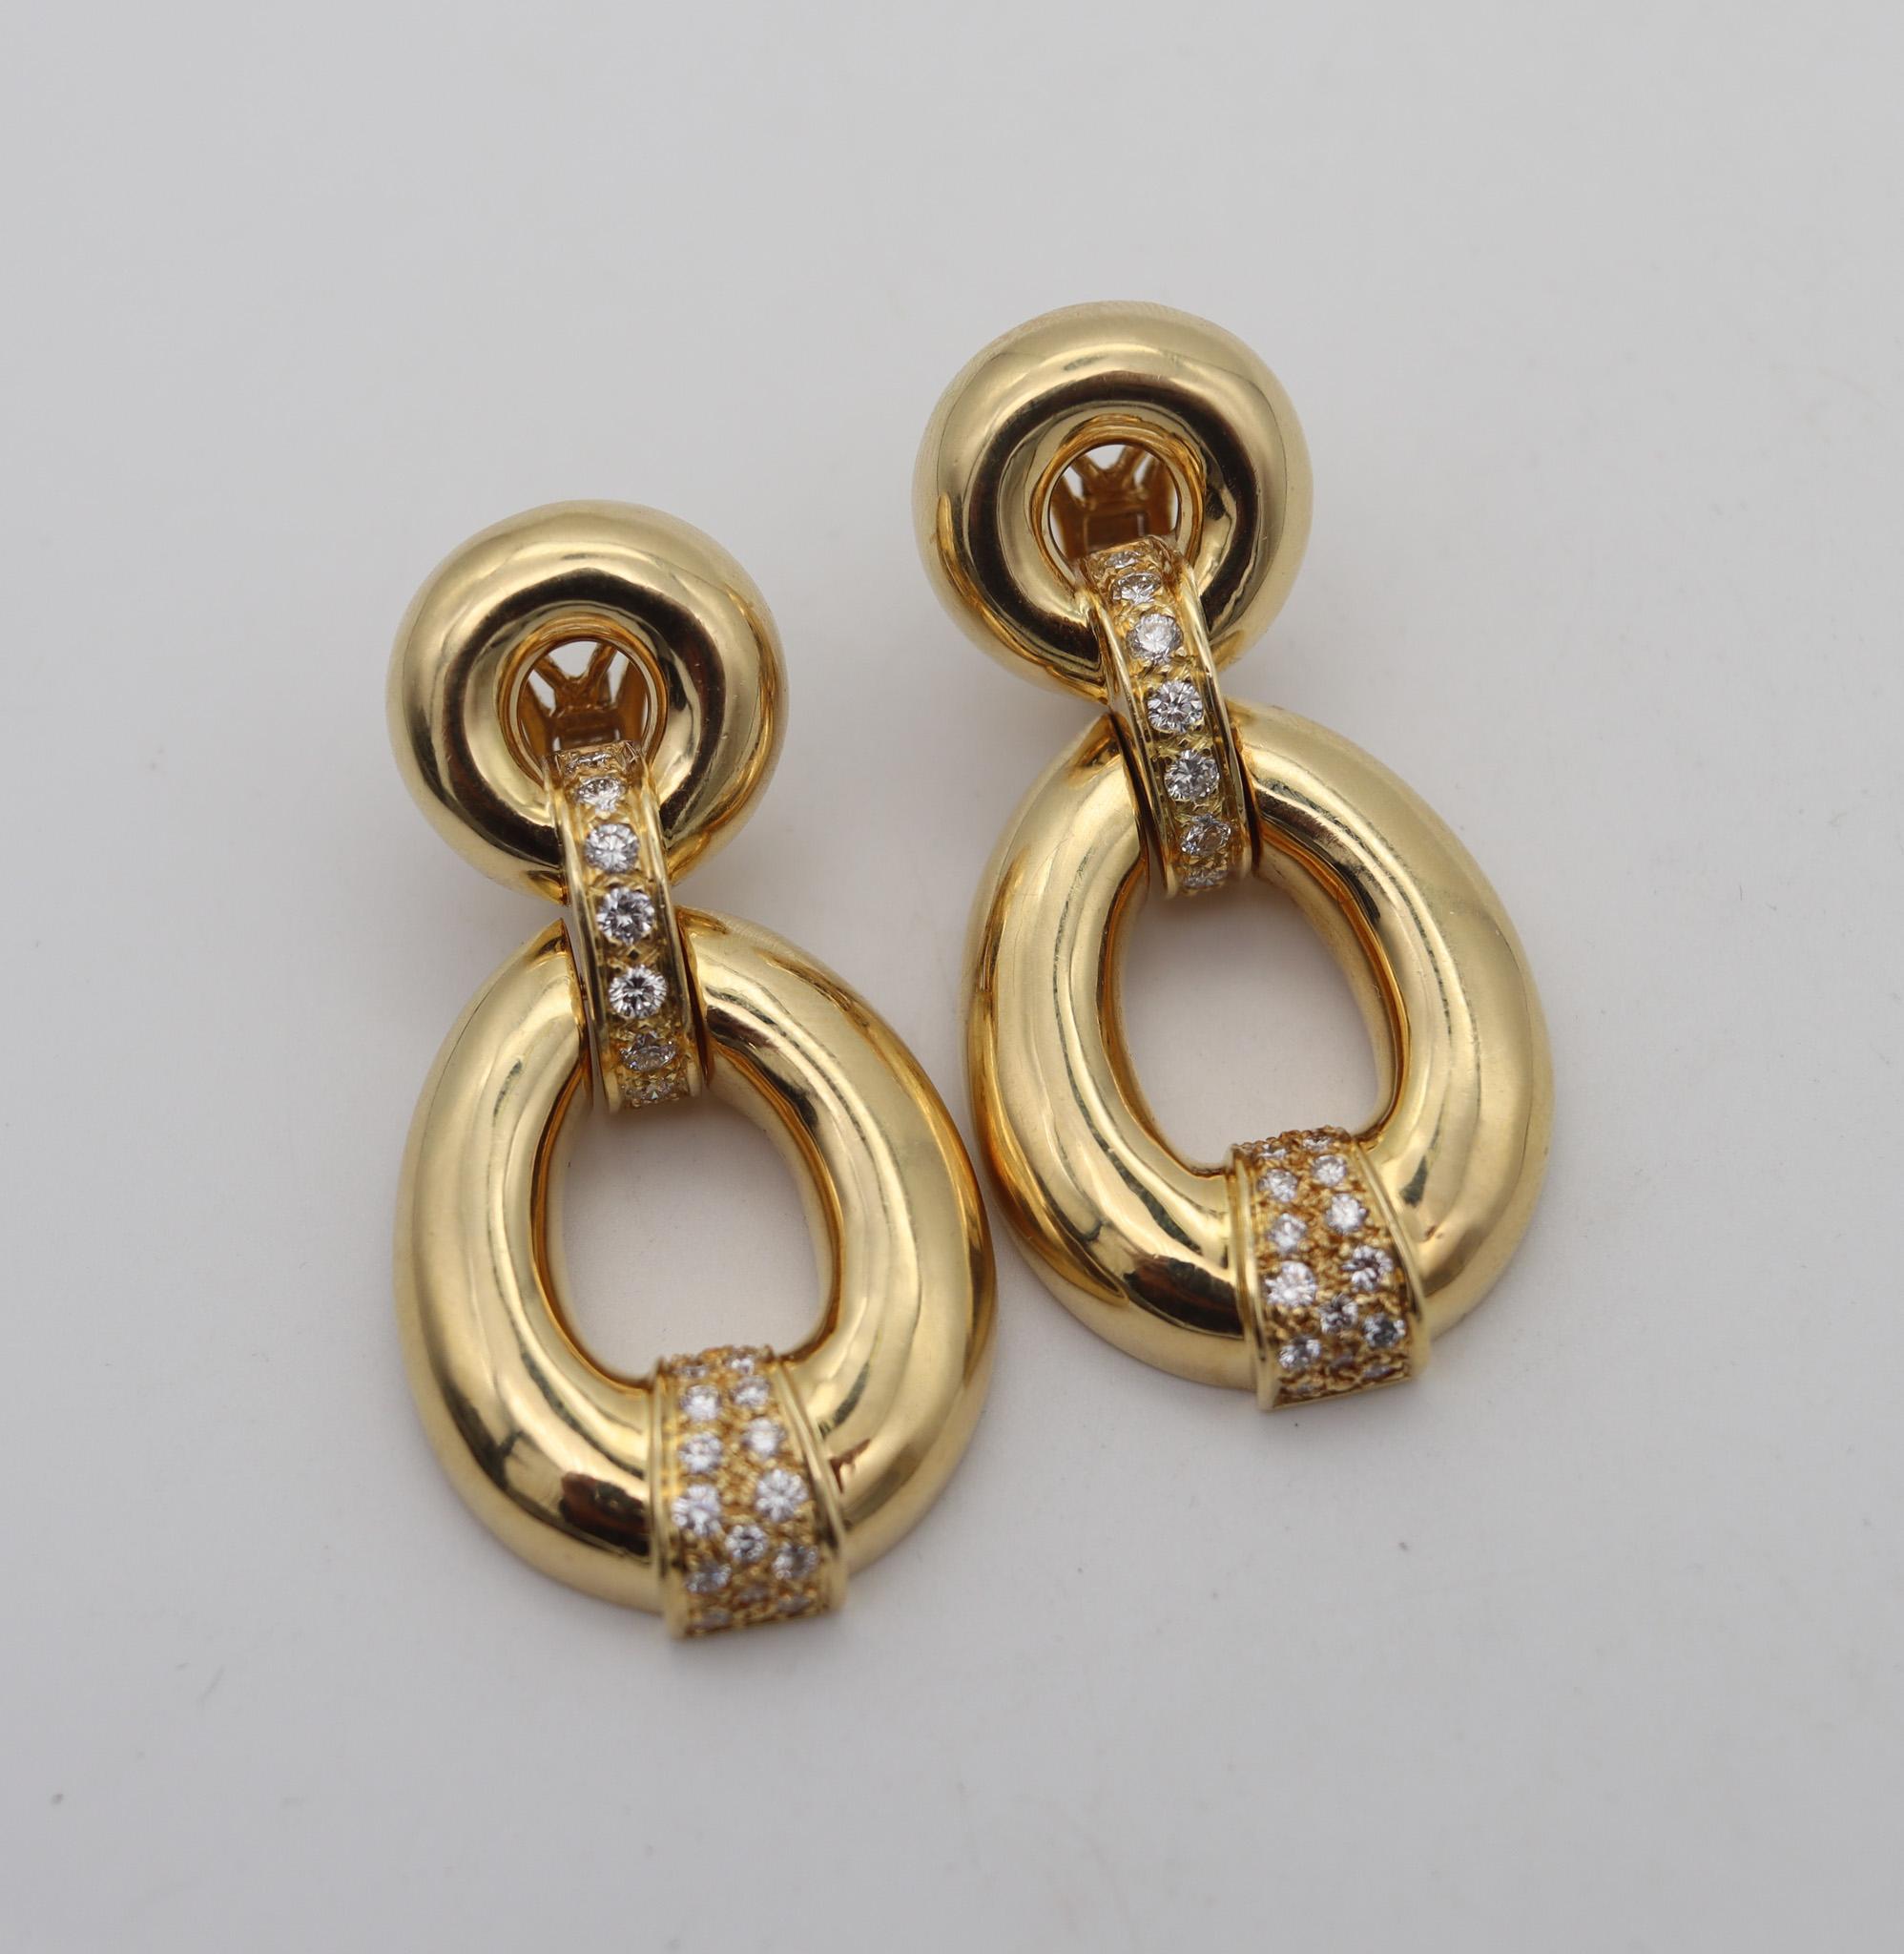 Brilliant Cut Fred Paris Door Knockers Earrings In 18Kt Yellow Gold With 2.40 Ctw VS Diamonds For Sale